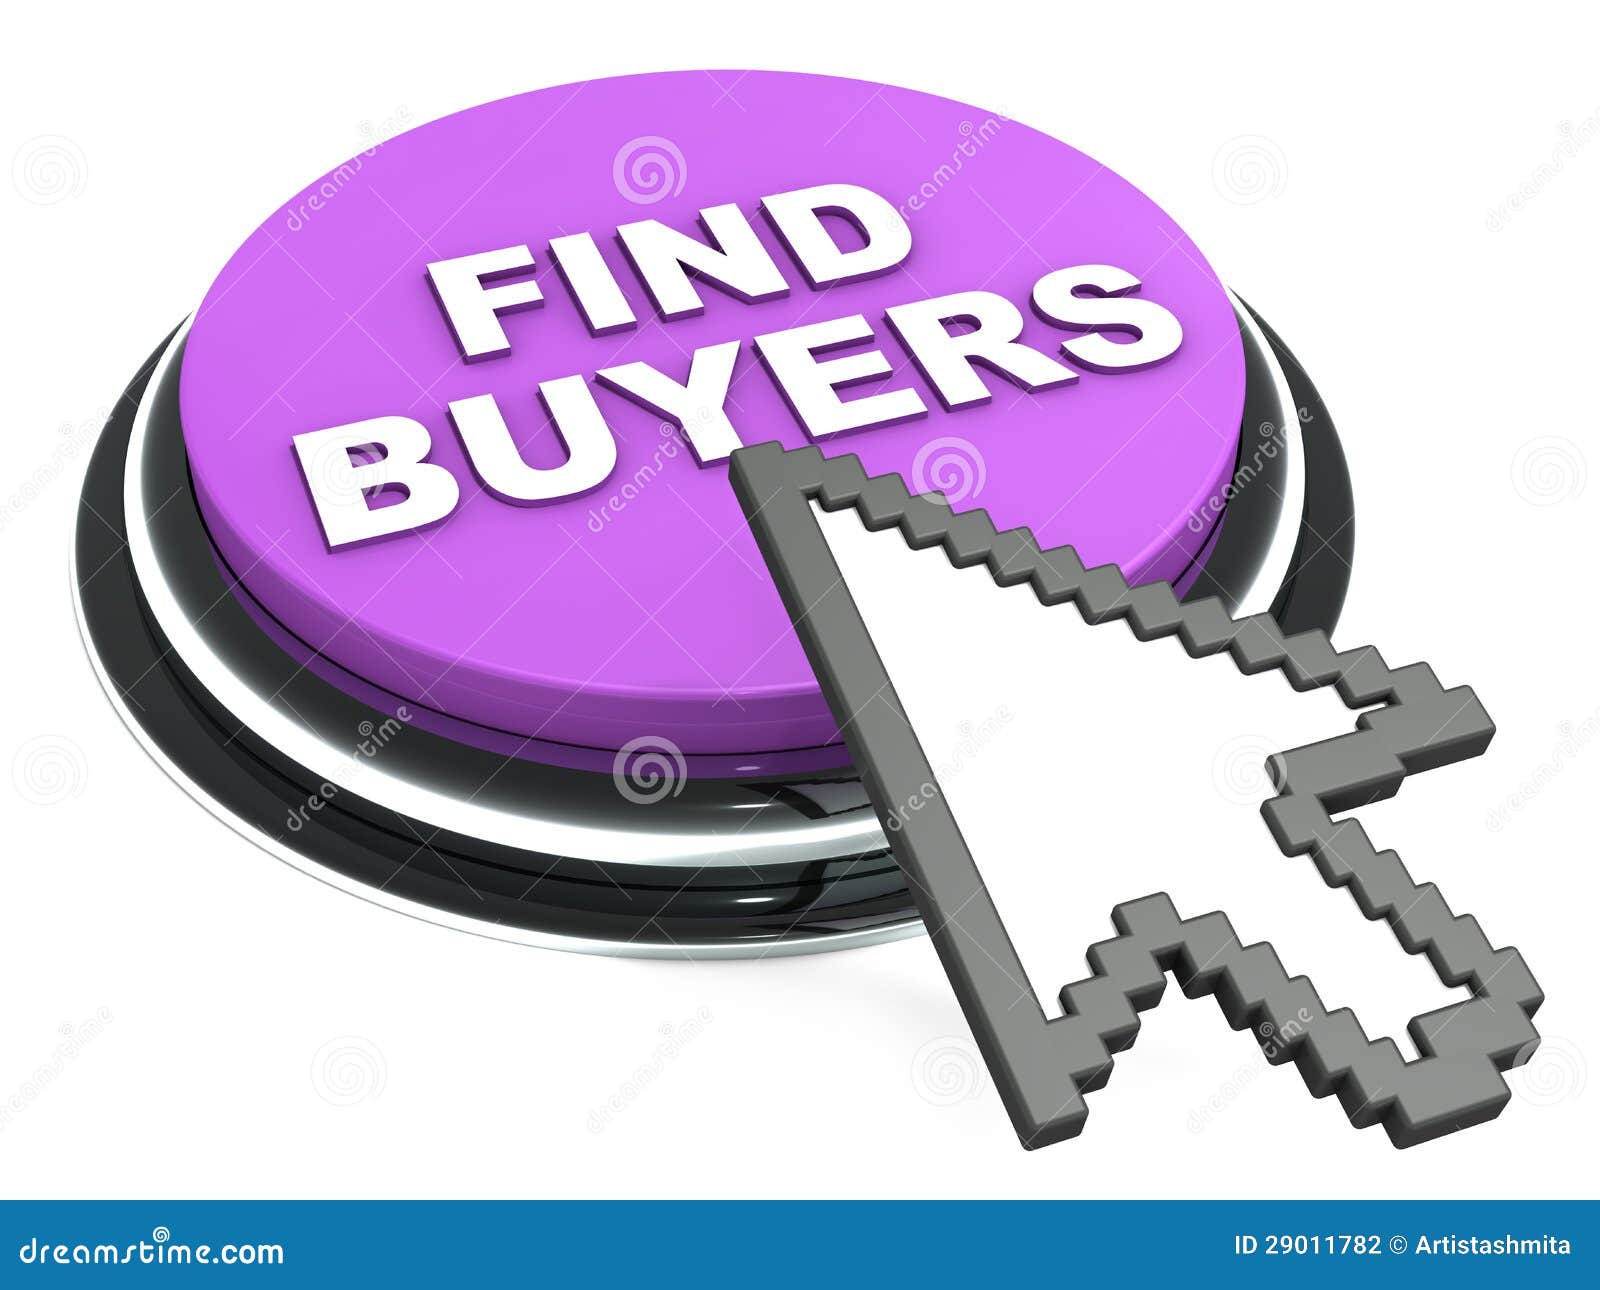 find buyers